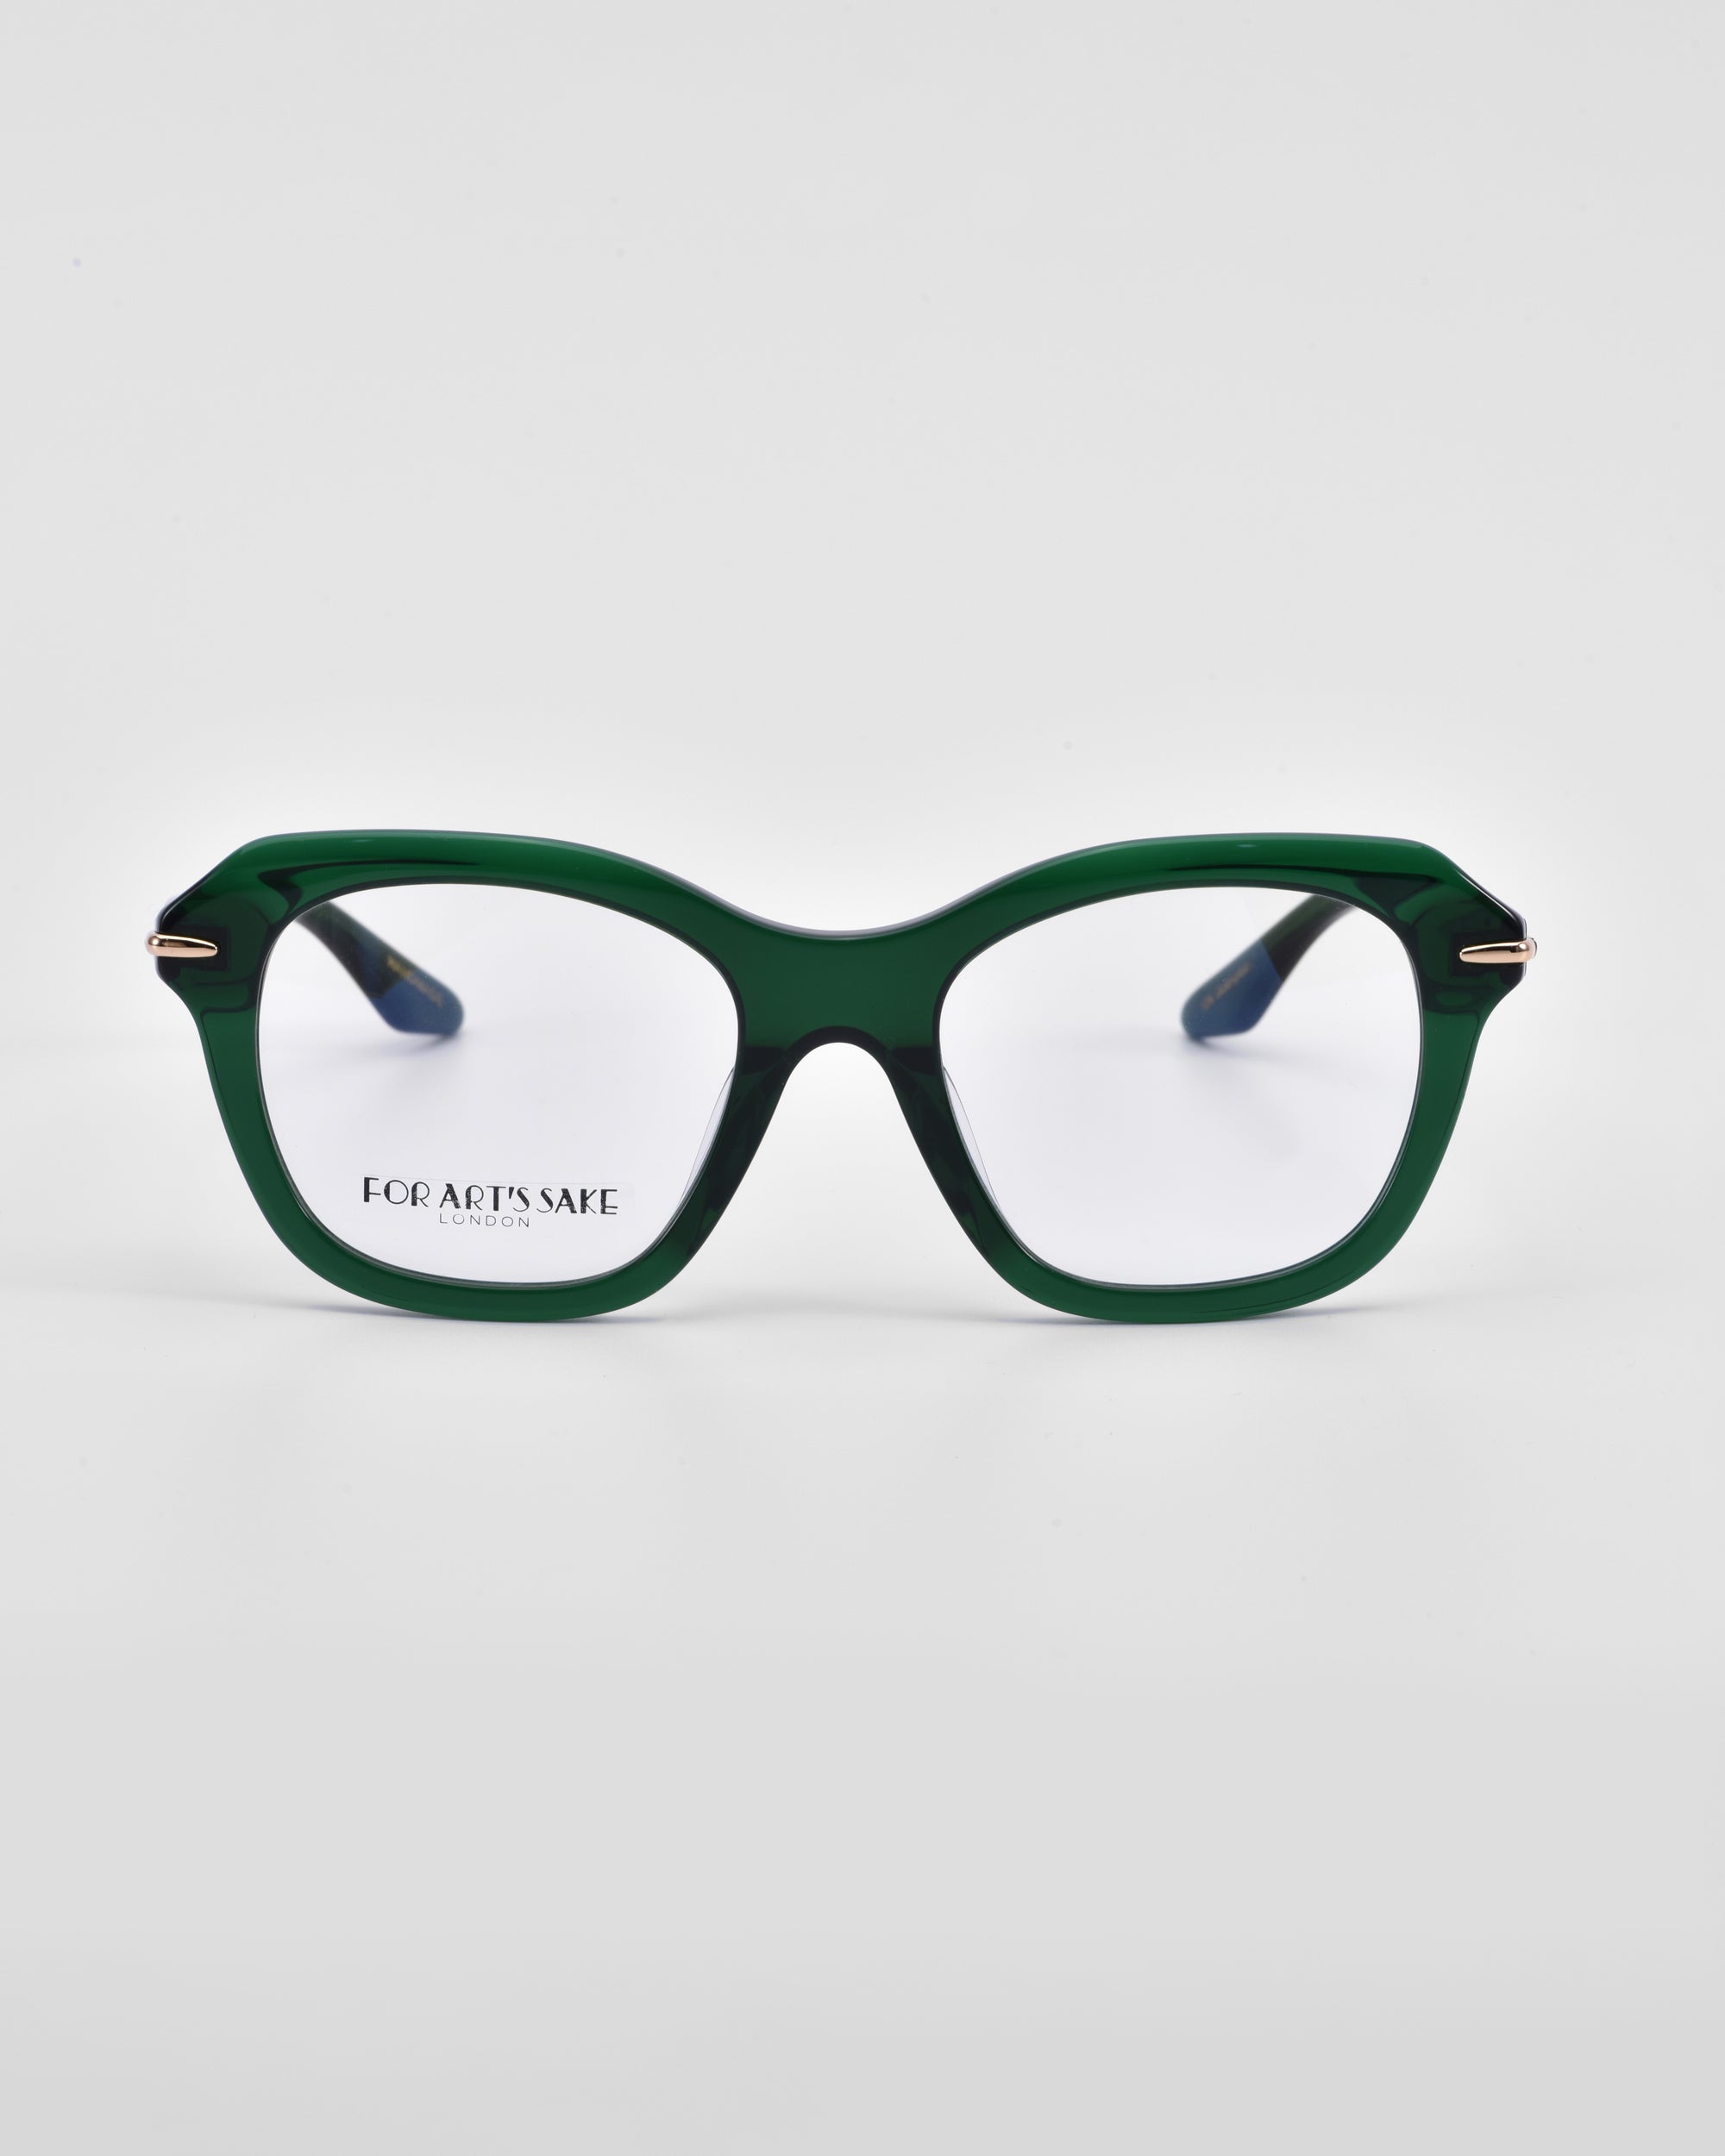 A pair of green, square-framed eyeglasses with subtle 18-karat gold plating on the hinges. The lenses are clear, and the product name "Helene" and brand name "For Art's Sake®" are visible on the inside of the left lens. The background is white.